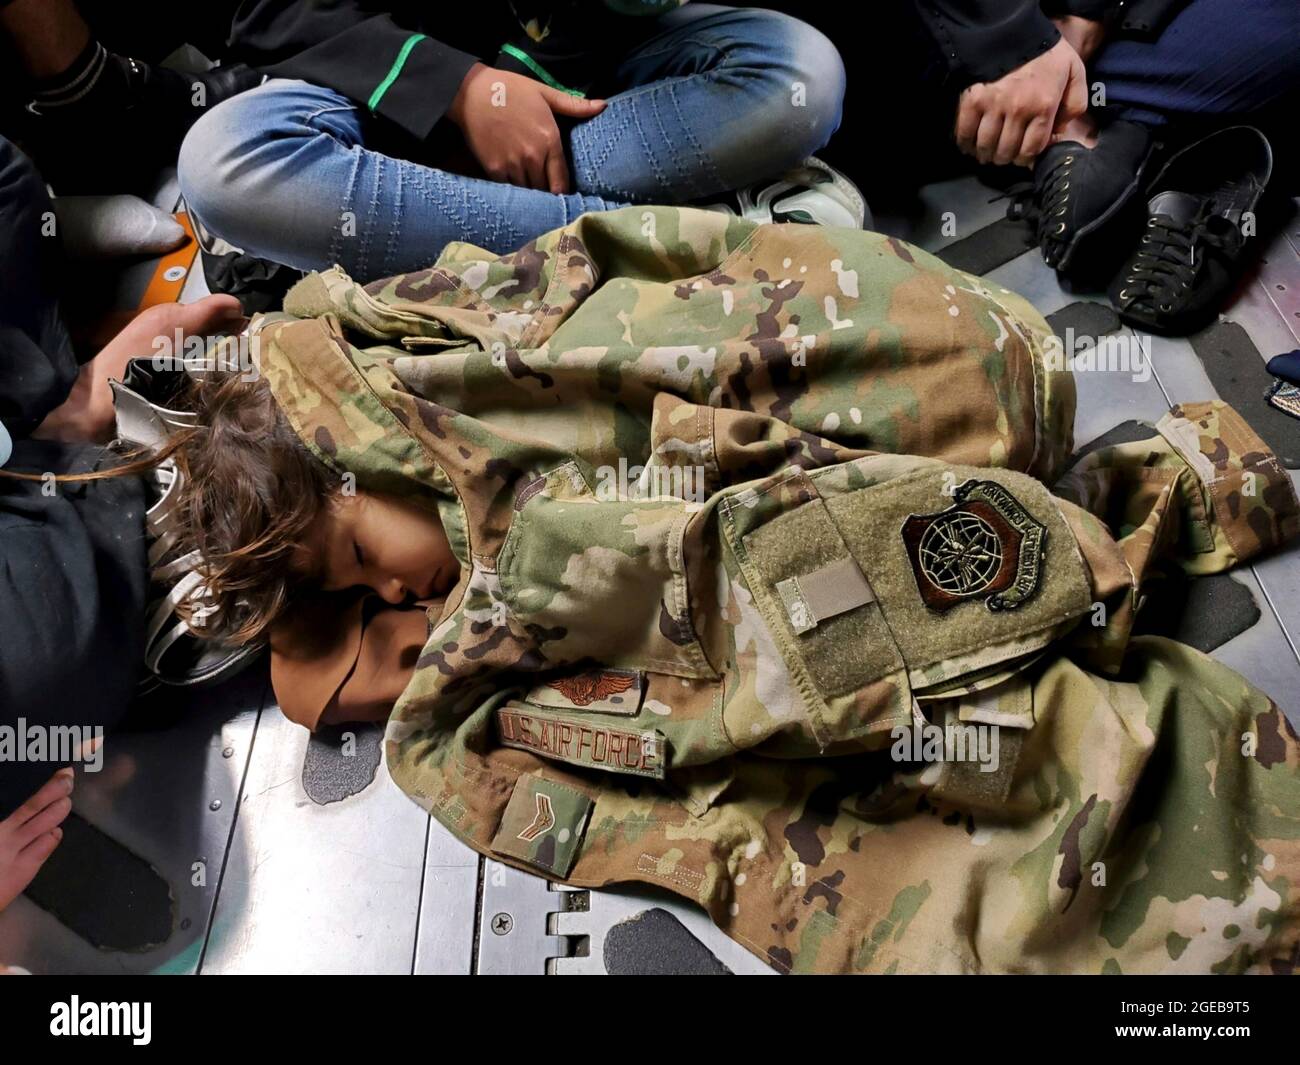 Kabul, Afghanistan. 18th Aug, 2021. An Afghan child sleeps on the cargo floor of a U.S. Air Force C-17 Globemaster III cargo aircraft, kept warm by a borrowed uniform jacket, during an evacuation flight from Hamid Karzai International Airport August 18, 2021 in Kabul, Afghanistan, Aug. 18, 2021. Credit: Planetpix/Alamy Live News Stock Photo